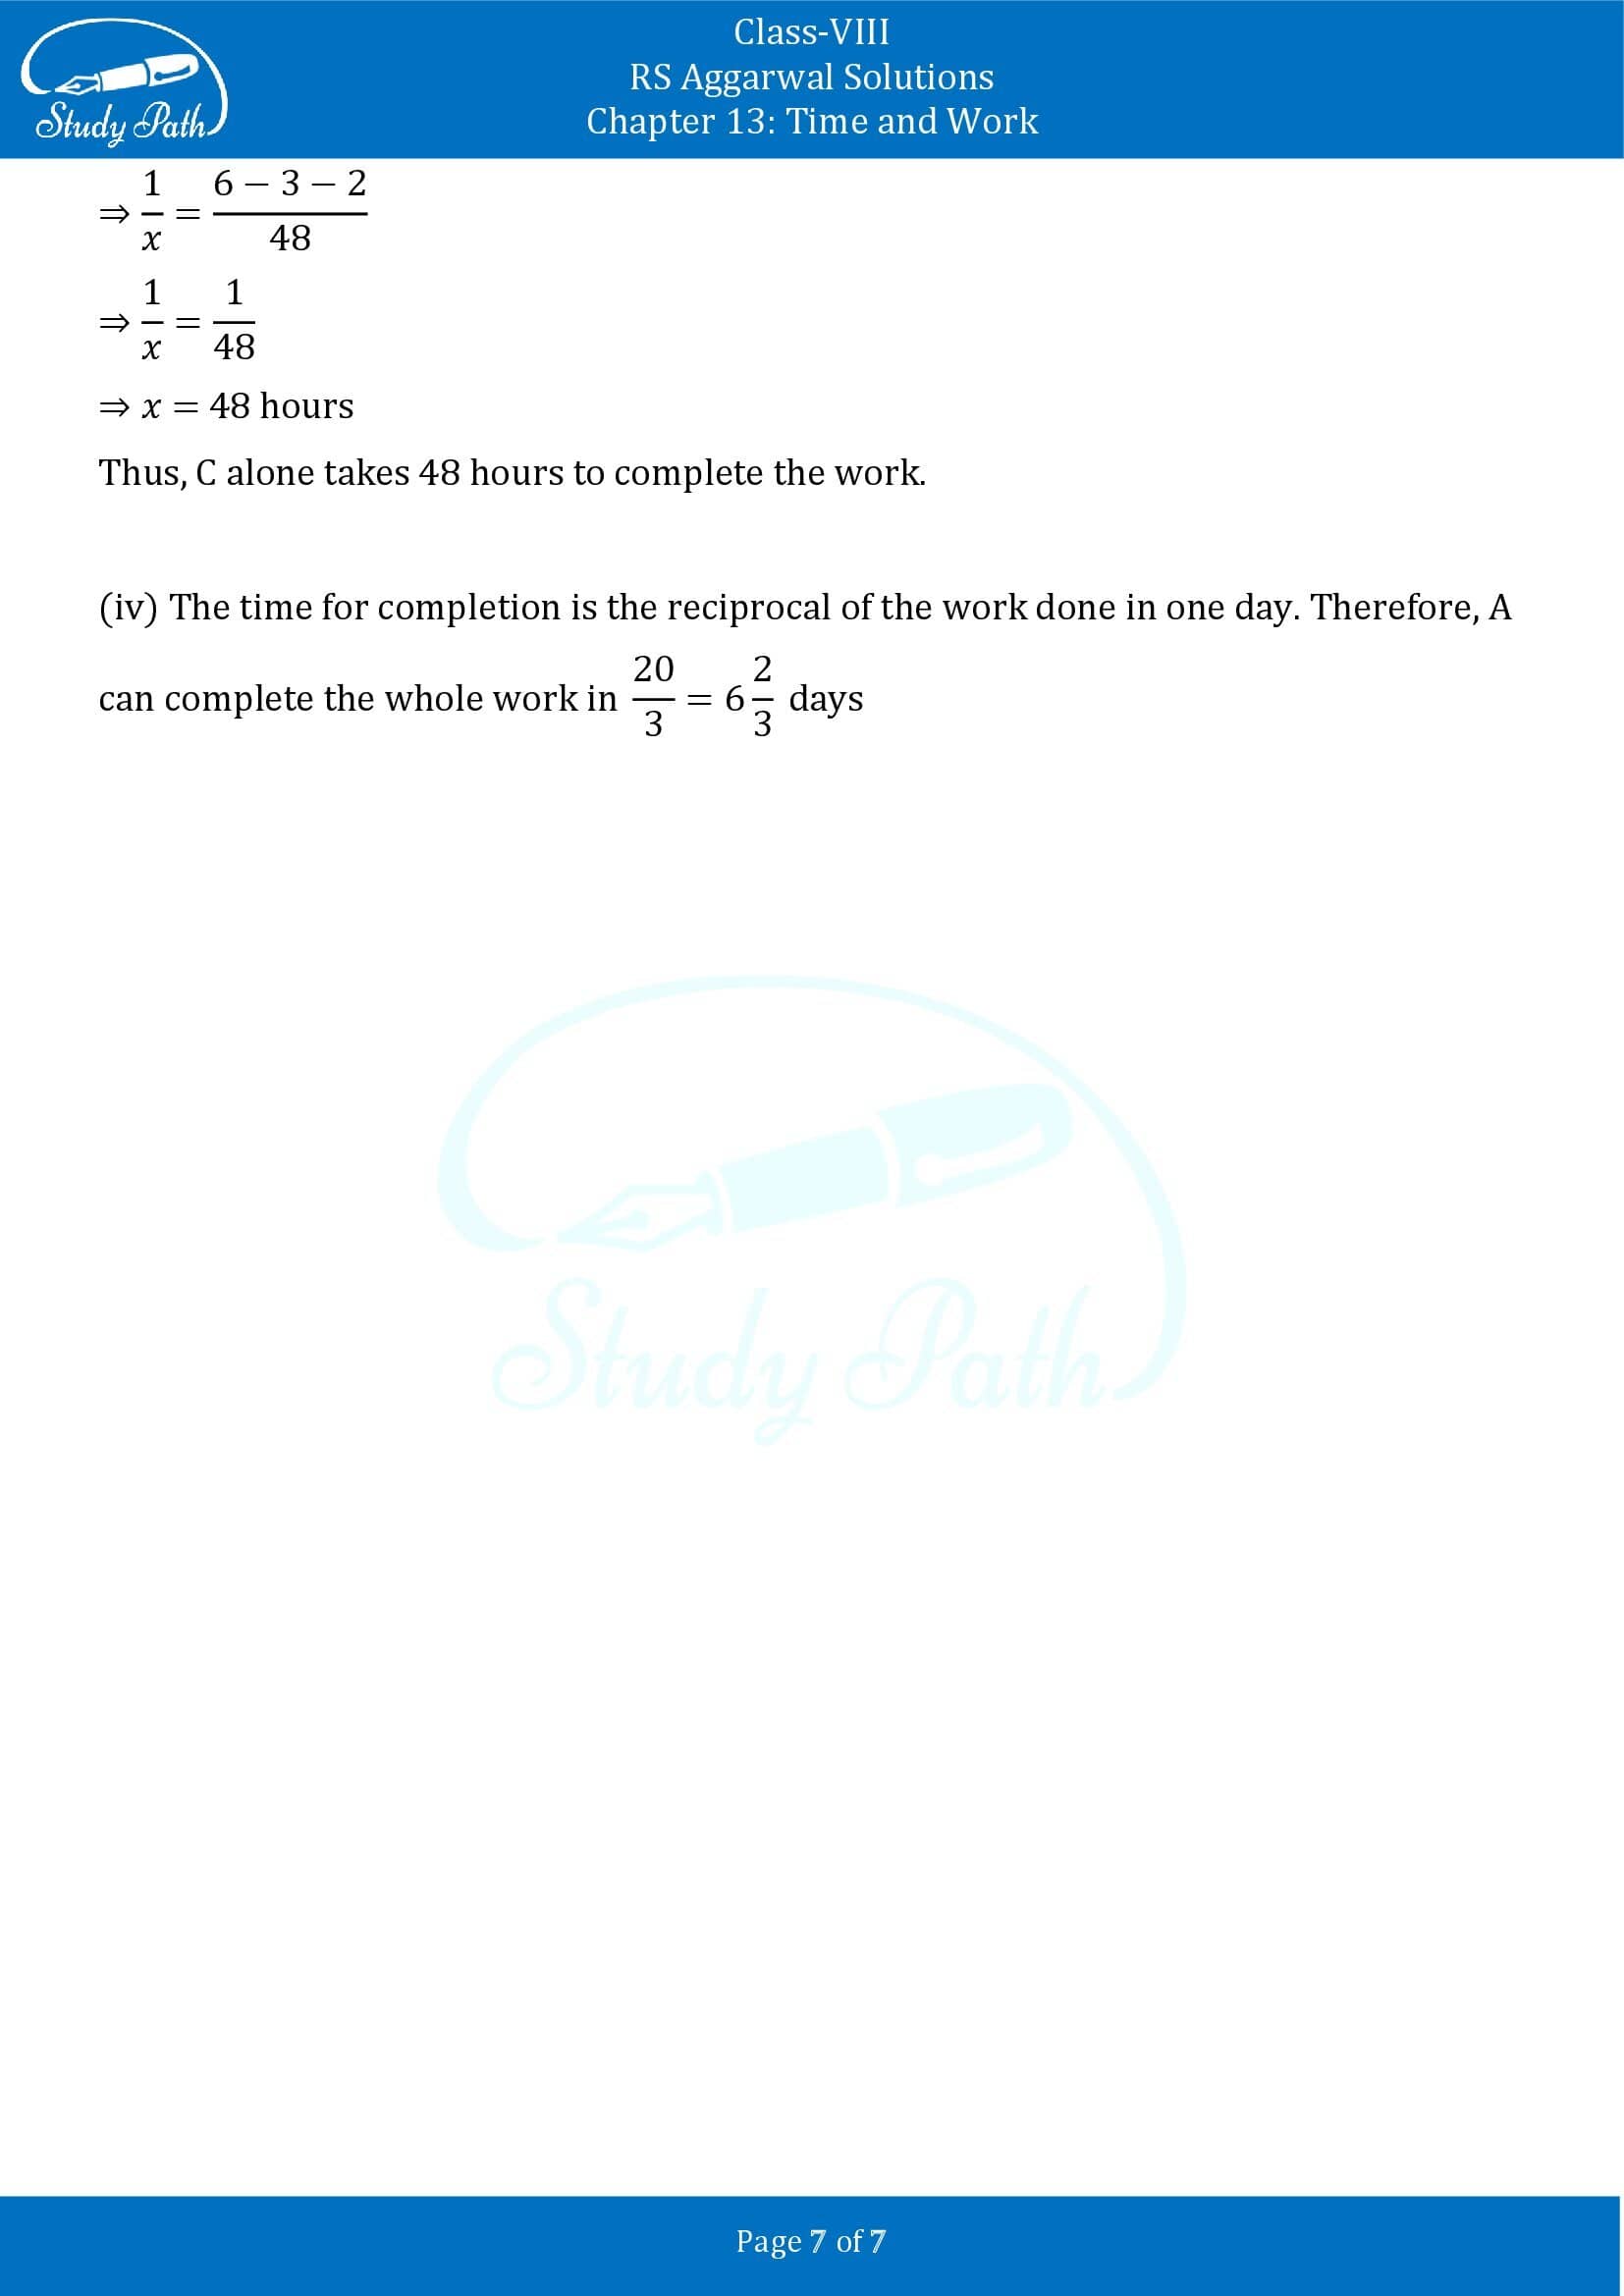 RS Aggarwal Solutions Class 8 Chapter 13 Time and Work Test Paper 00007